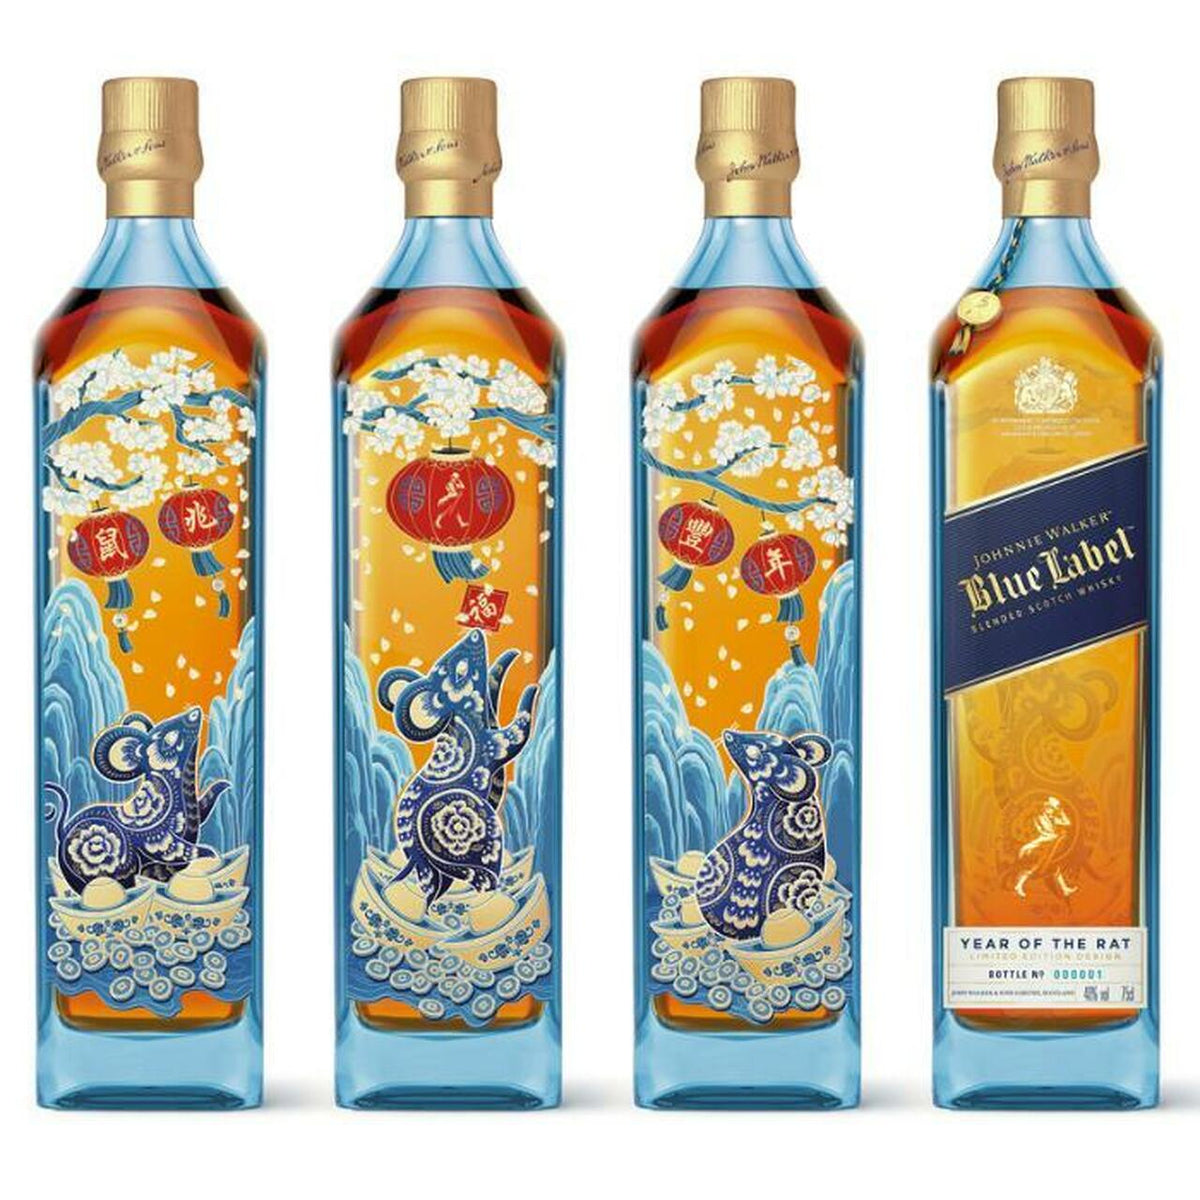 Johnnie Walker Blue Label Year of the Rat Blended Scotch Whisky 750ml